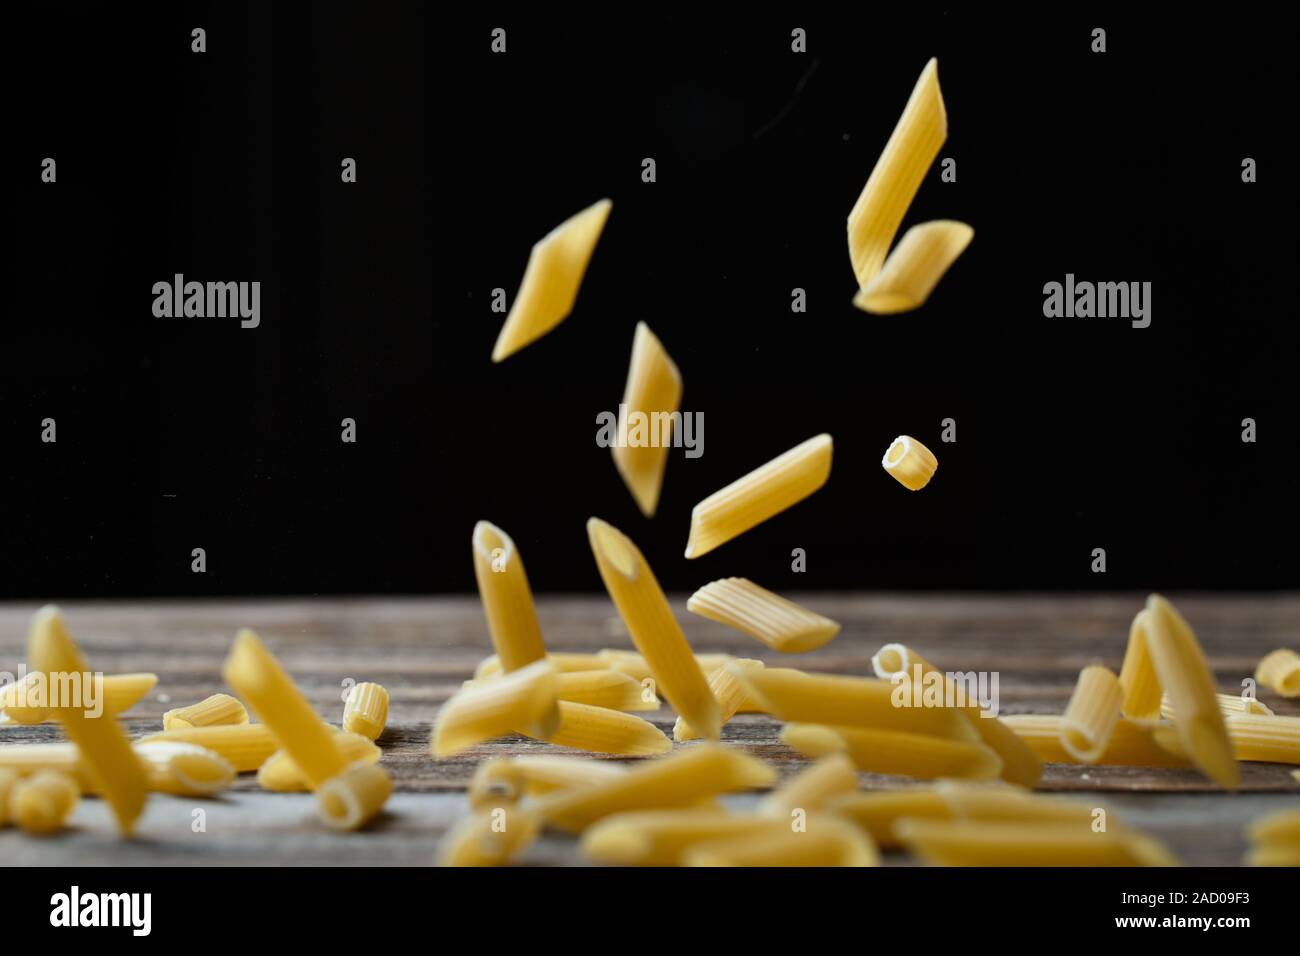 Download Falling Penne Pasta Flying Yellow Raw Macaroni Over Black Background Stock Photo Alamy Yellowimages Mockups